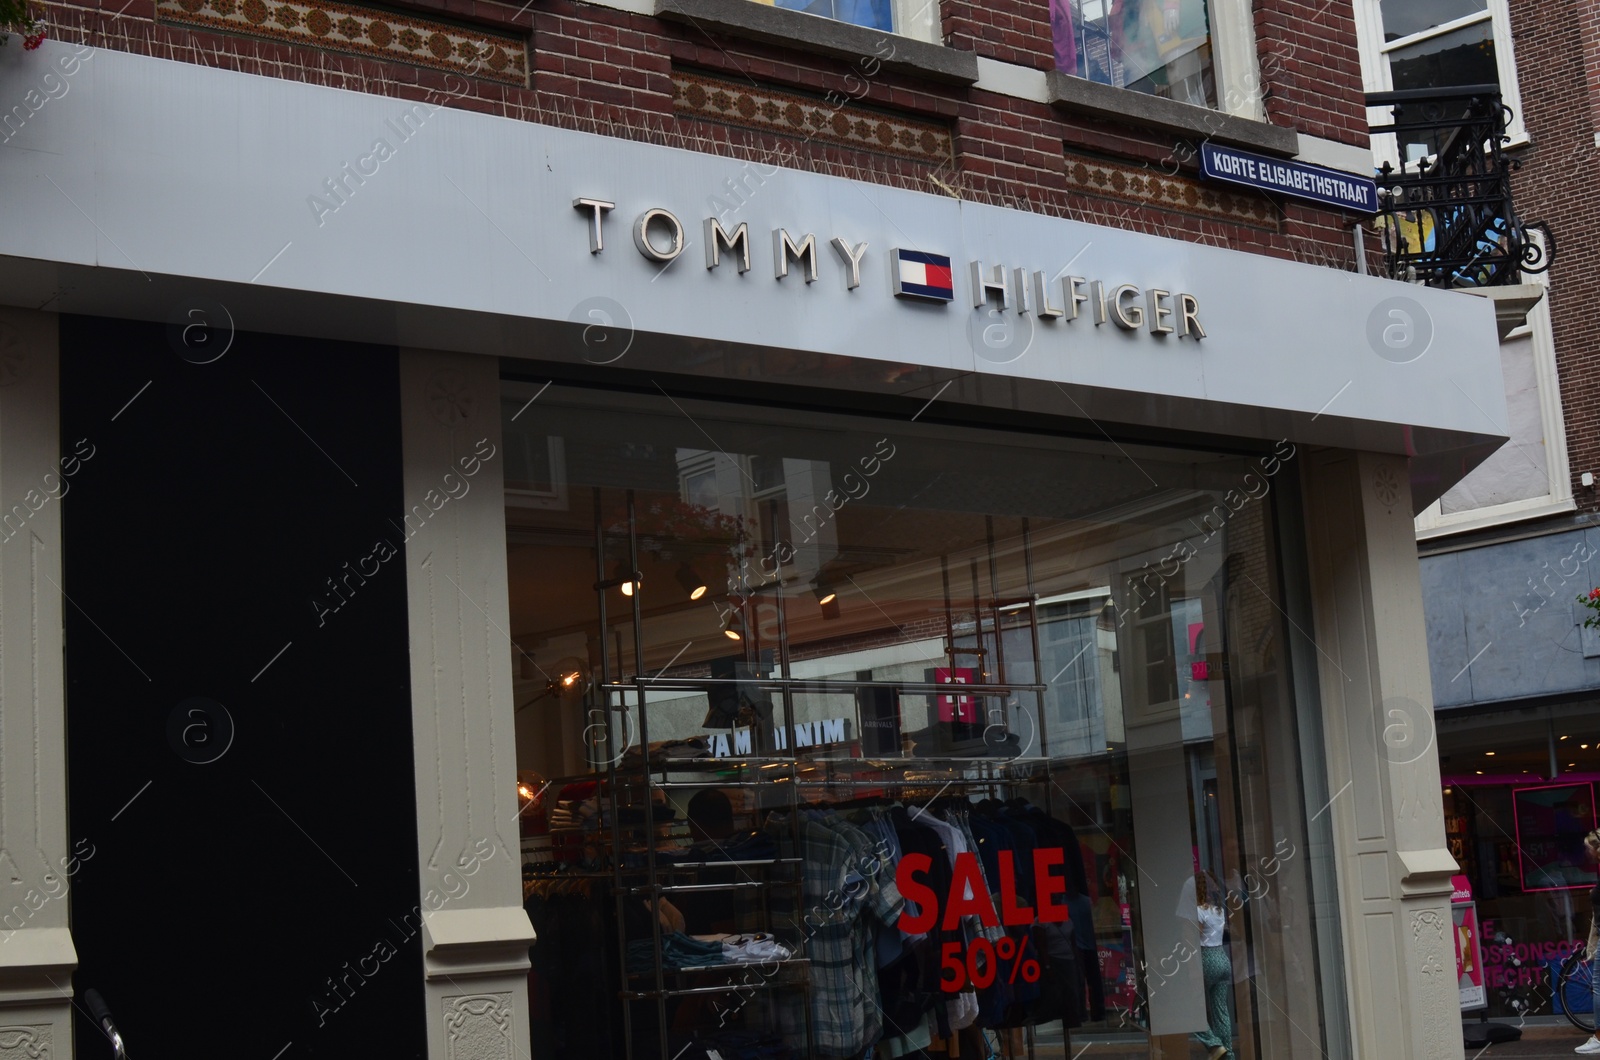 Photo of Utrecht, Netherlands July 02, 2022: Facade of Tommy Hilfiger fashion store outdoors